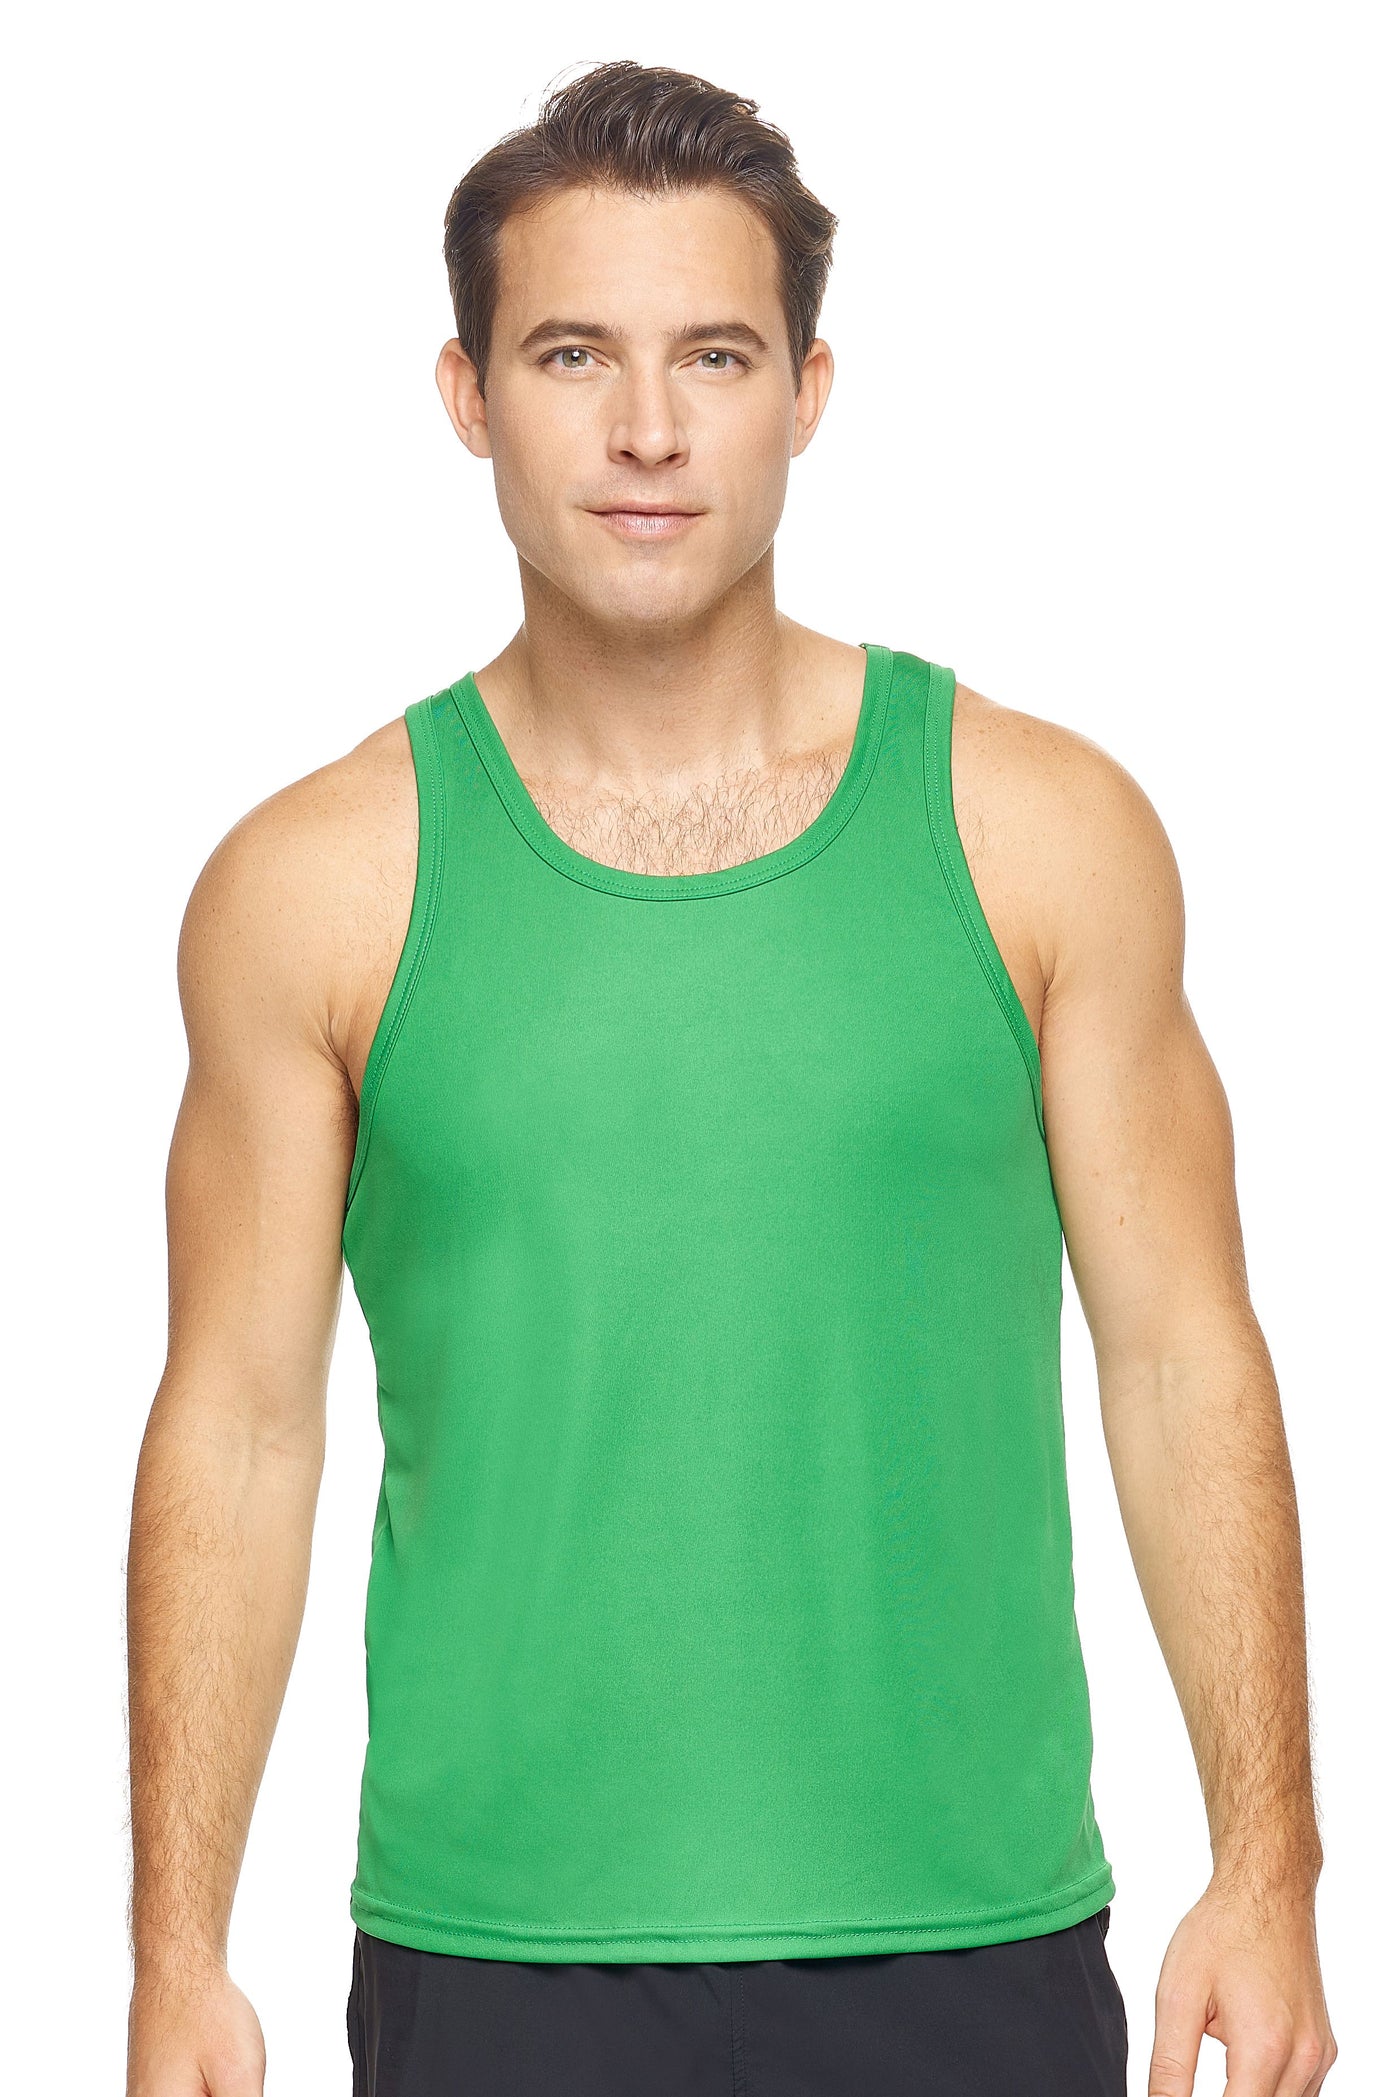 Expert Brand Retail Eco-Friendly Activewear Sportswear Men's pk MaX™ Endurance Sleeveless Tank Made in USA kelly green#color_kelly-green